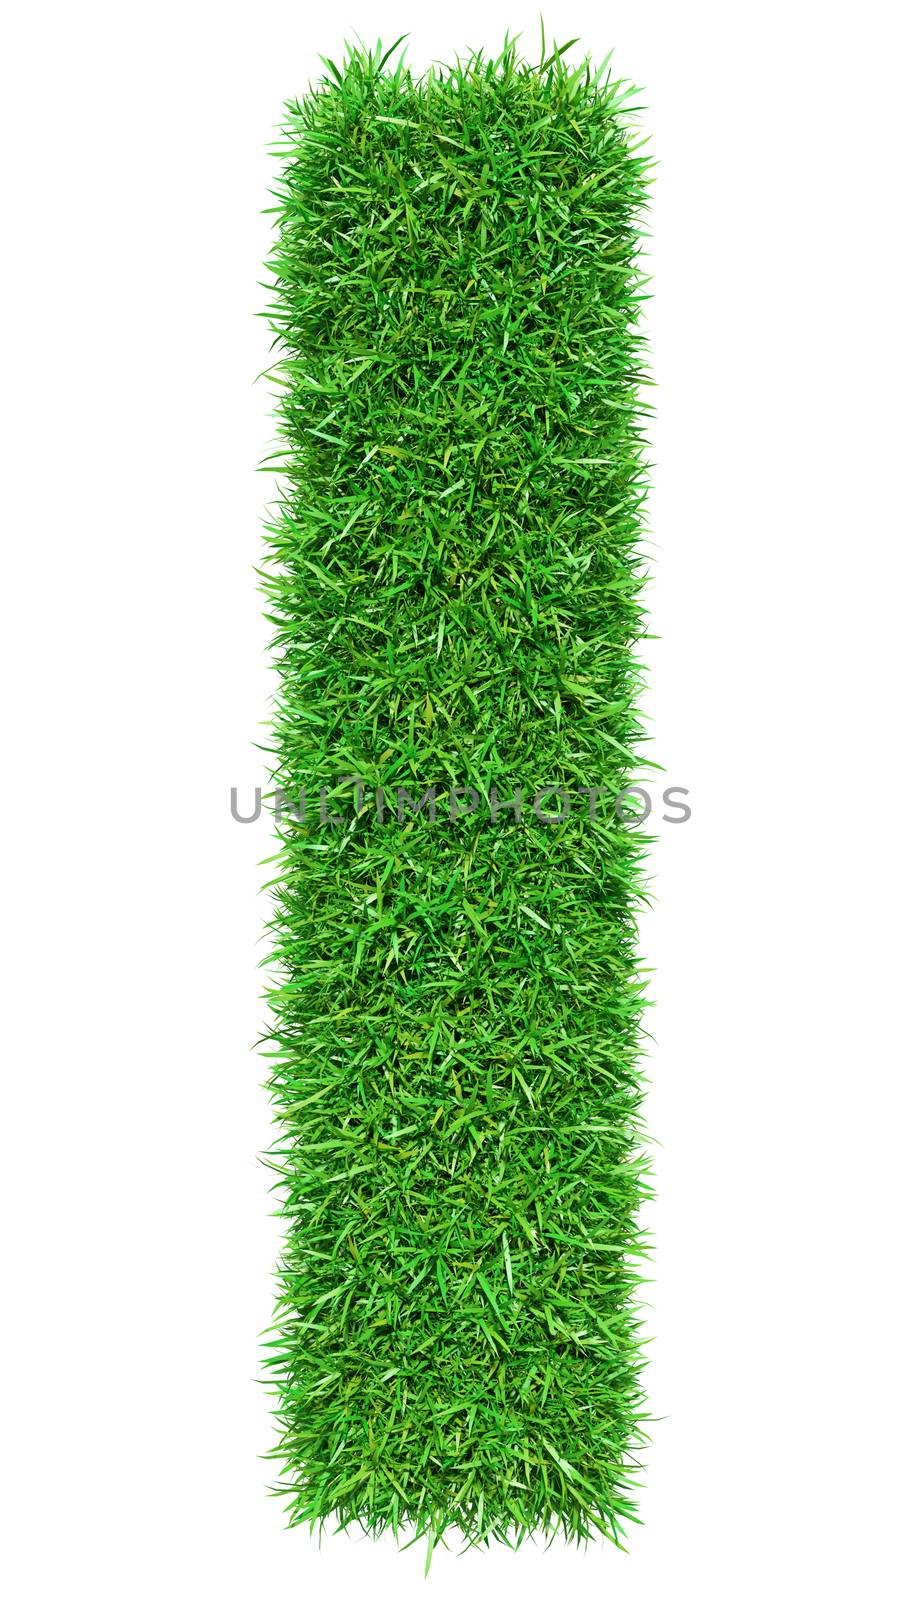 Green Grass Letter I by cherezoff